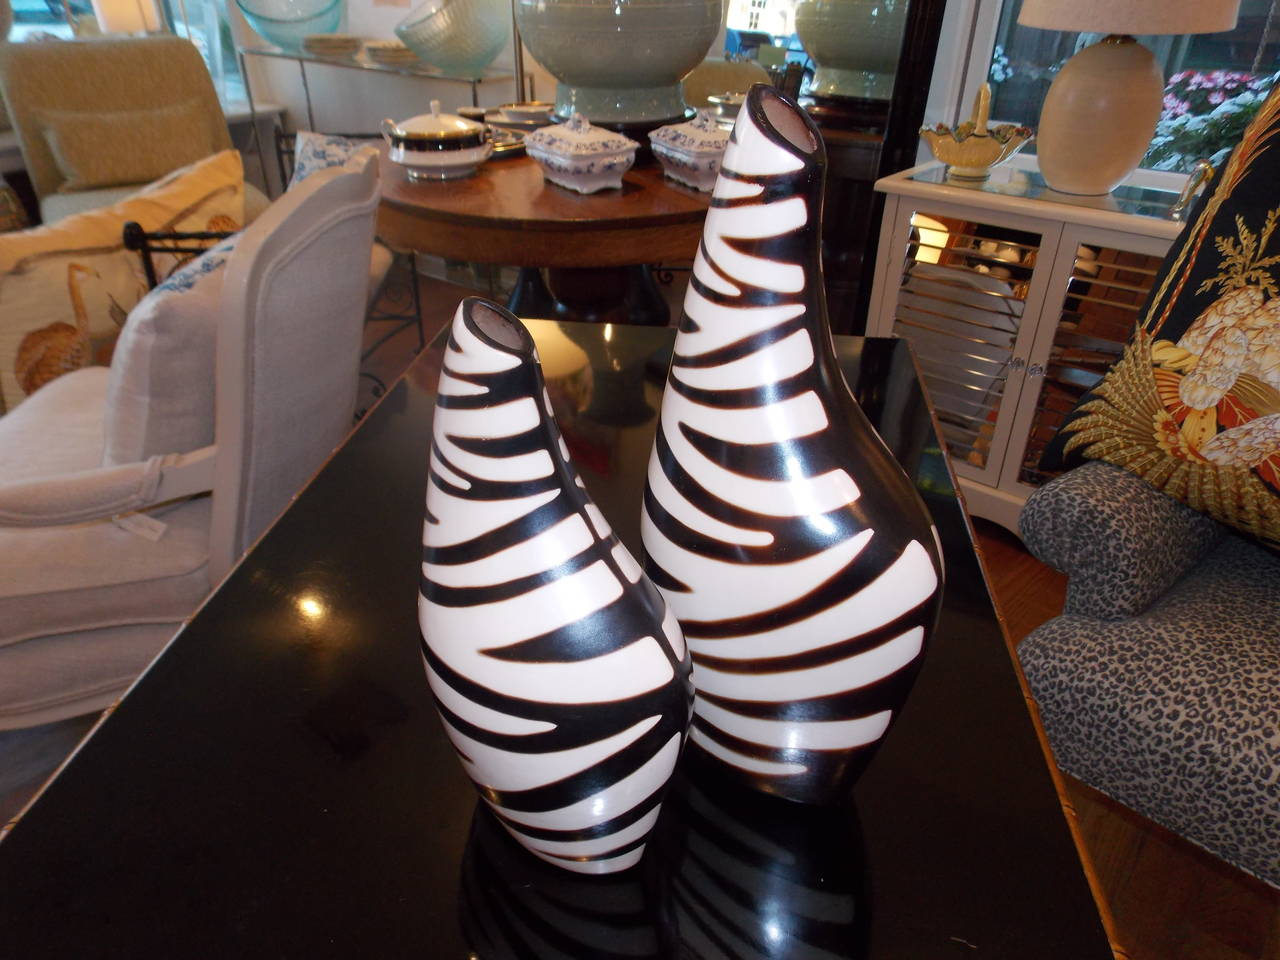 Paired together these black and white sculptural vases/vessels make an outstanding contemporary statement. Had thrown and hand-painted. 
The larger one measures H 15 inches, D 8 inches, the smaller one measures 
H 11.5 inches D 7 inches.